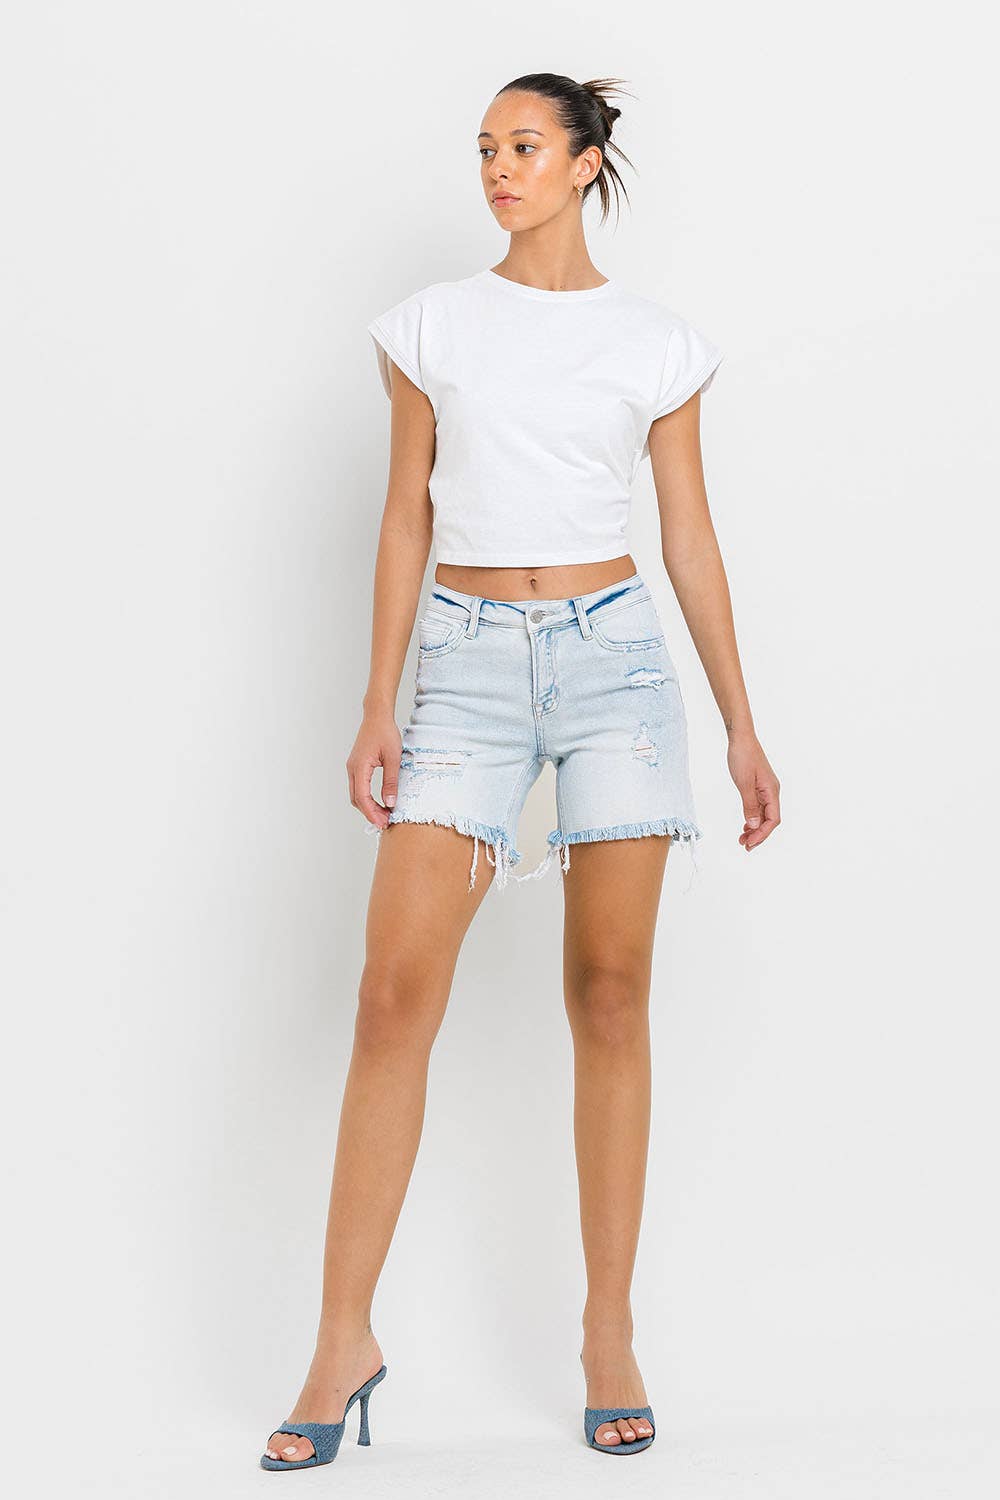 VERVET by FLYING MONKEY - MID RISE DISTRESSED STRETCH SHORTS